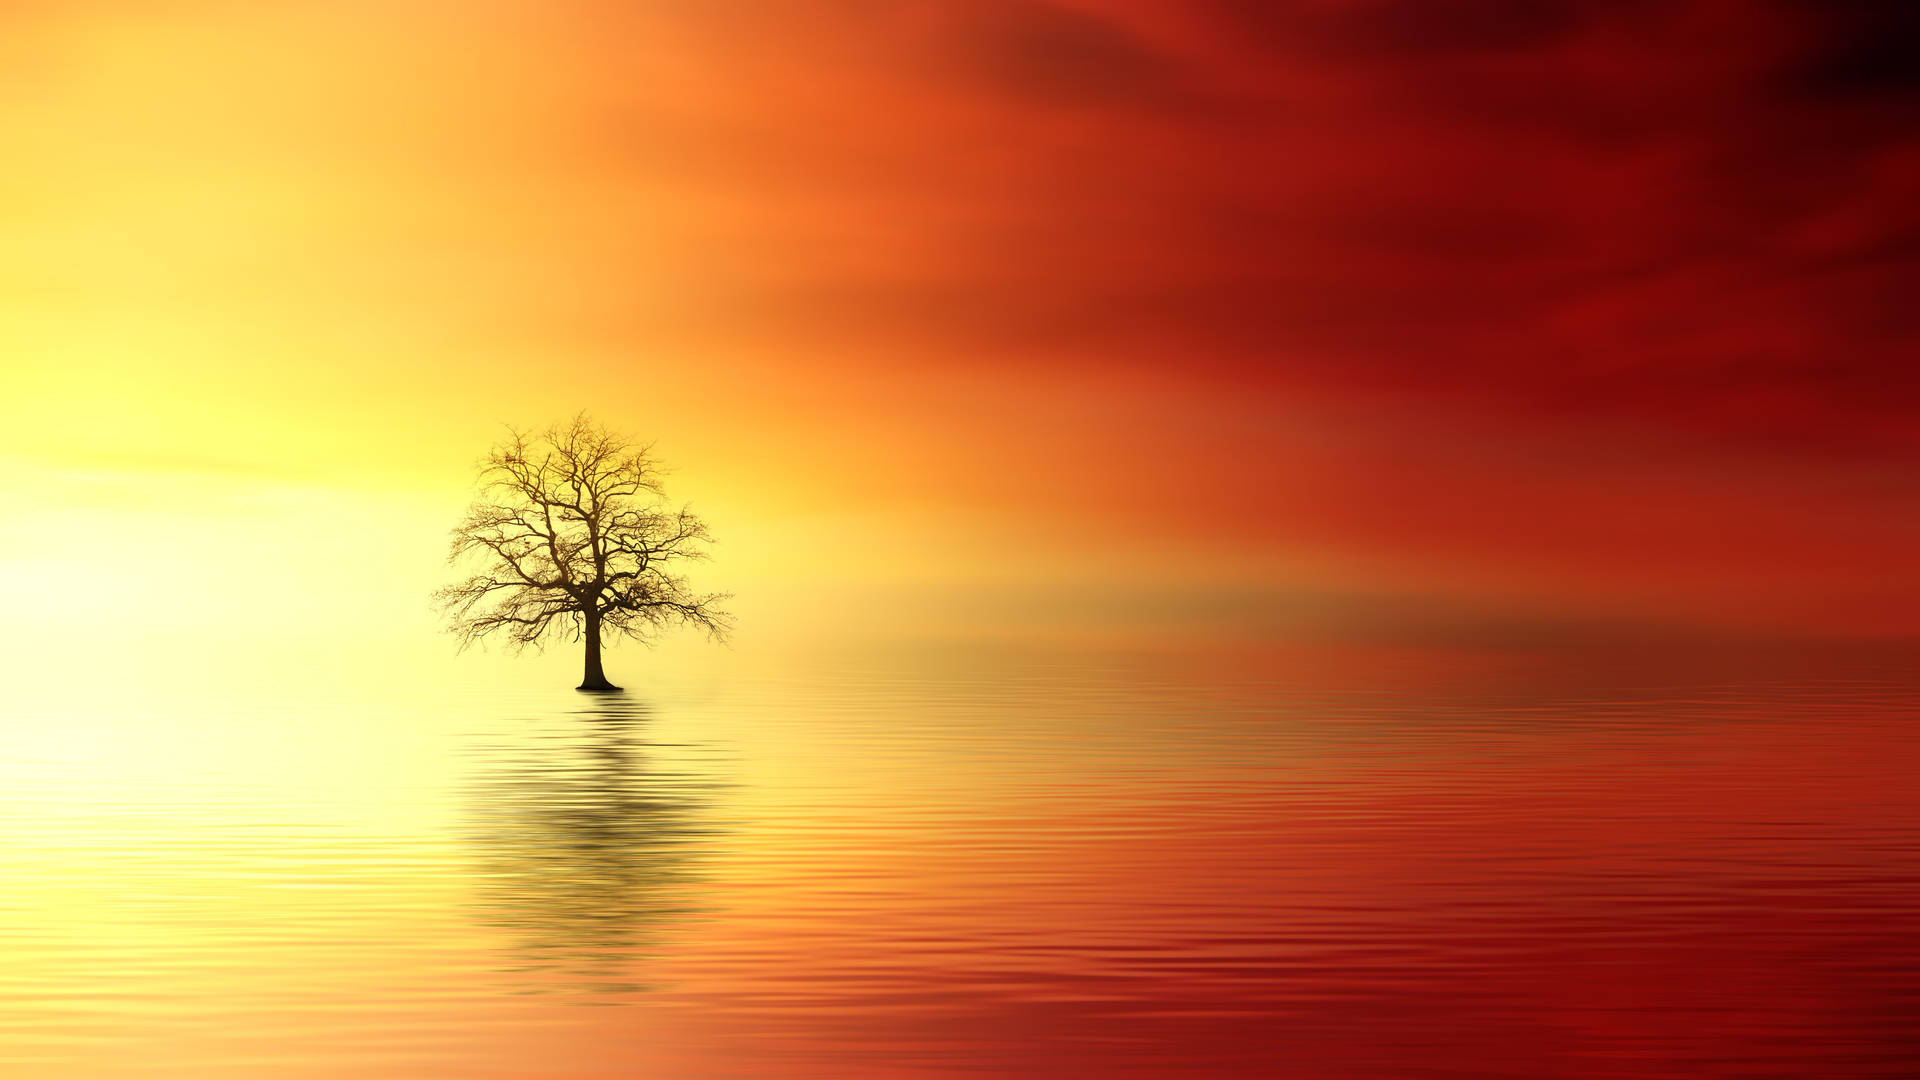 Tree Painting With Orange And Yellow Sunset Background